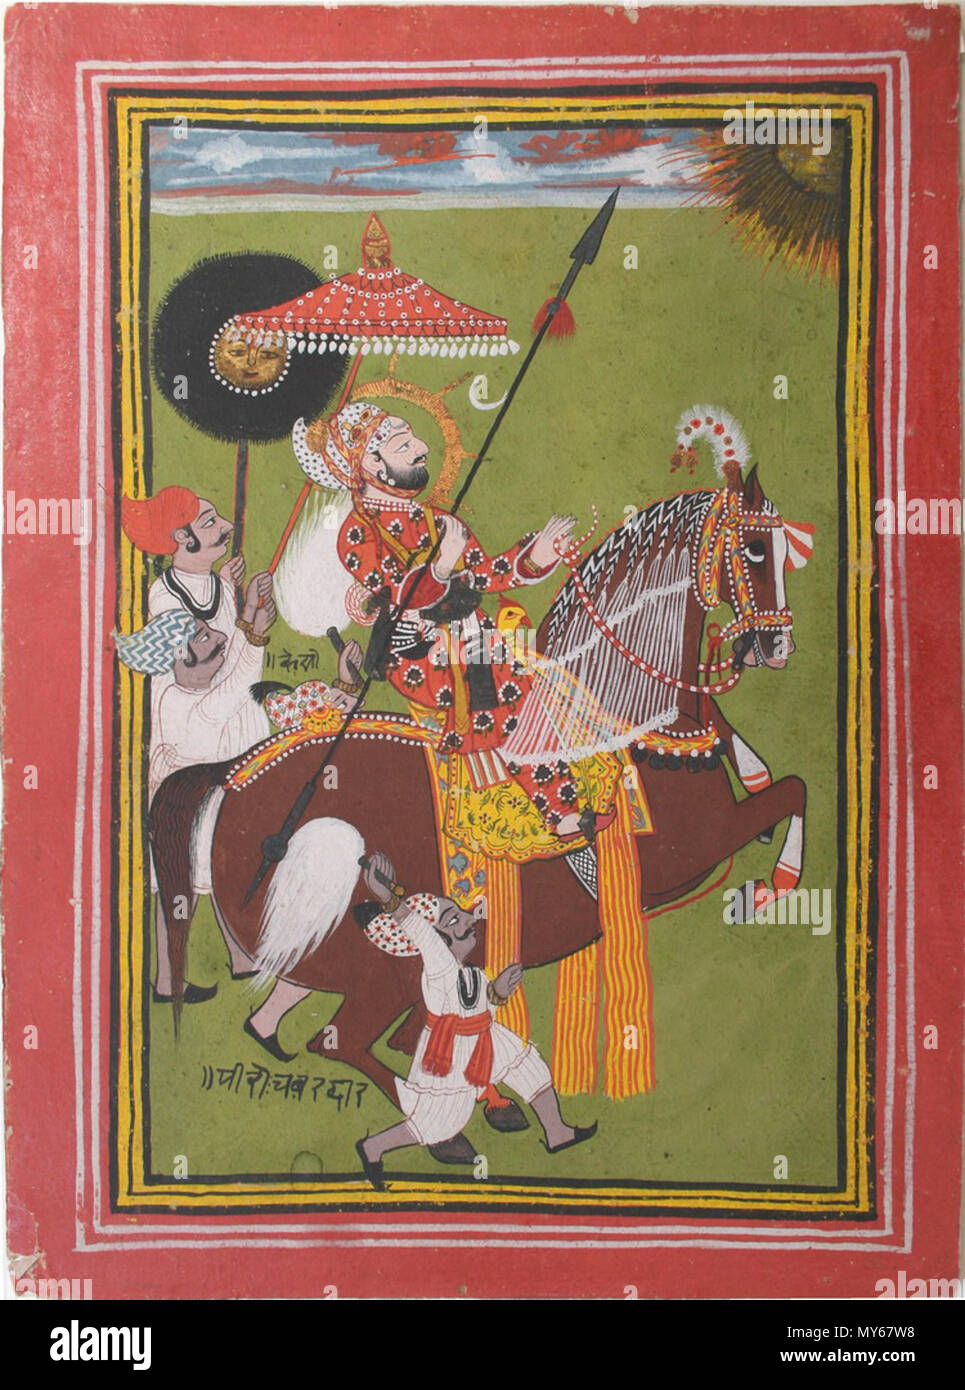 . Posthumous equestrian portrait of Maharana Ari Singh (r. 1761-73). Mewar, circa 1820-40. Opaque watercolour with gold on wasli. 30.4 x 22.3cm The inscriptions inform that the artist was Memji, with two of the attendants named: Keso and Piro chabardar (the chawar/chauri-bearer). circa 1820-40. Unknown 361 Mewar Maharana Ari Singh Stock Photo